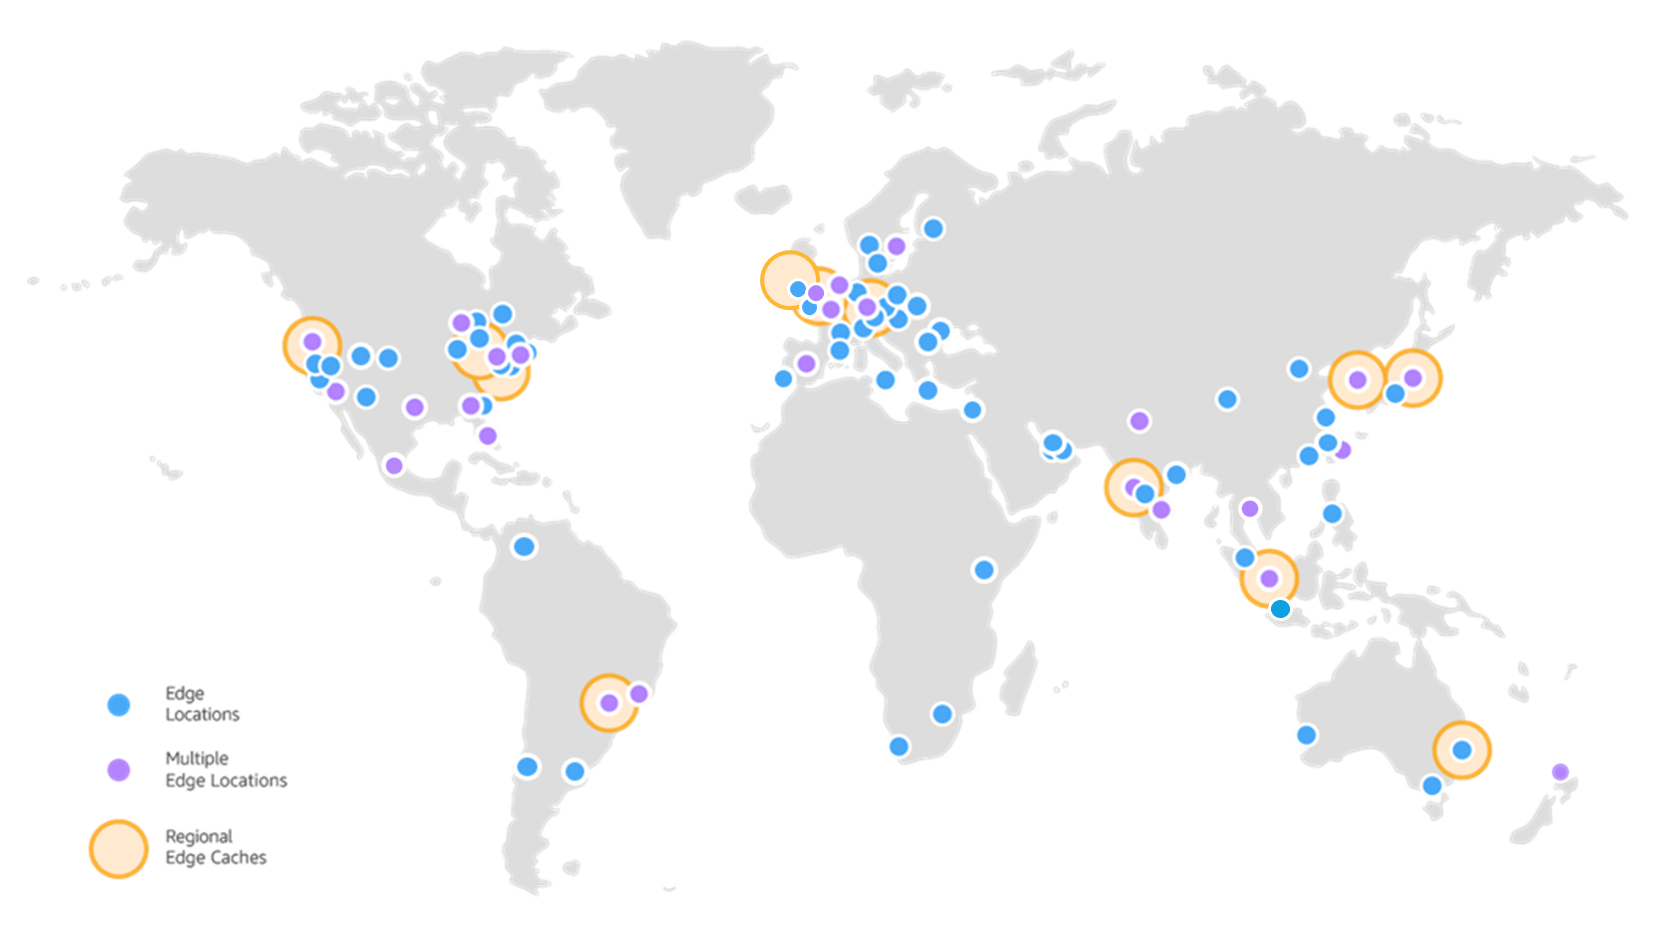 Edge Locations of CloudFront